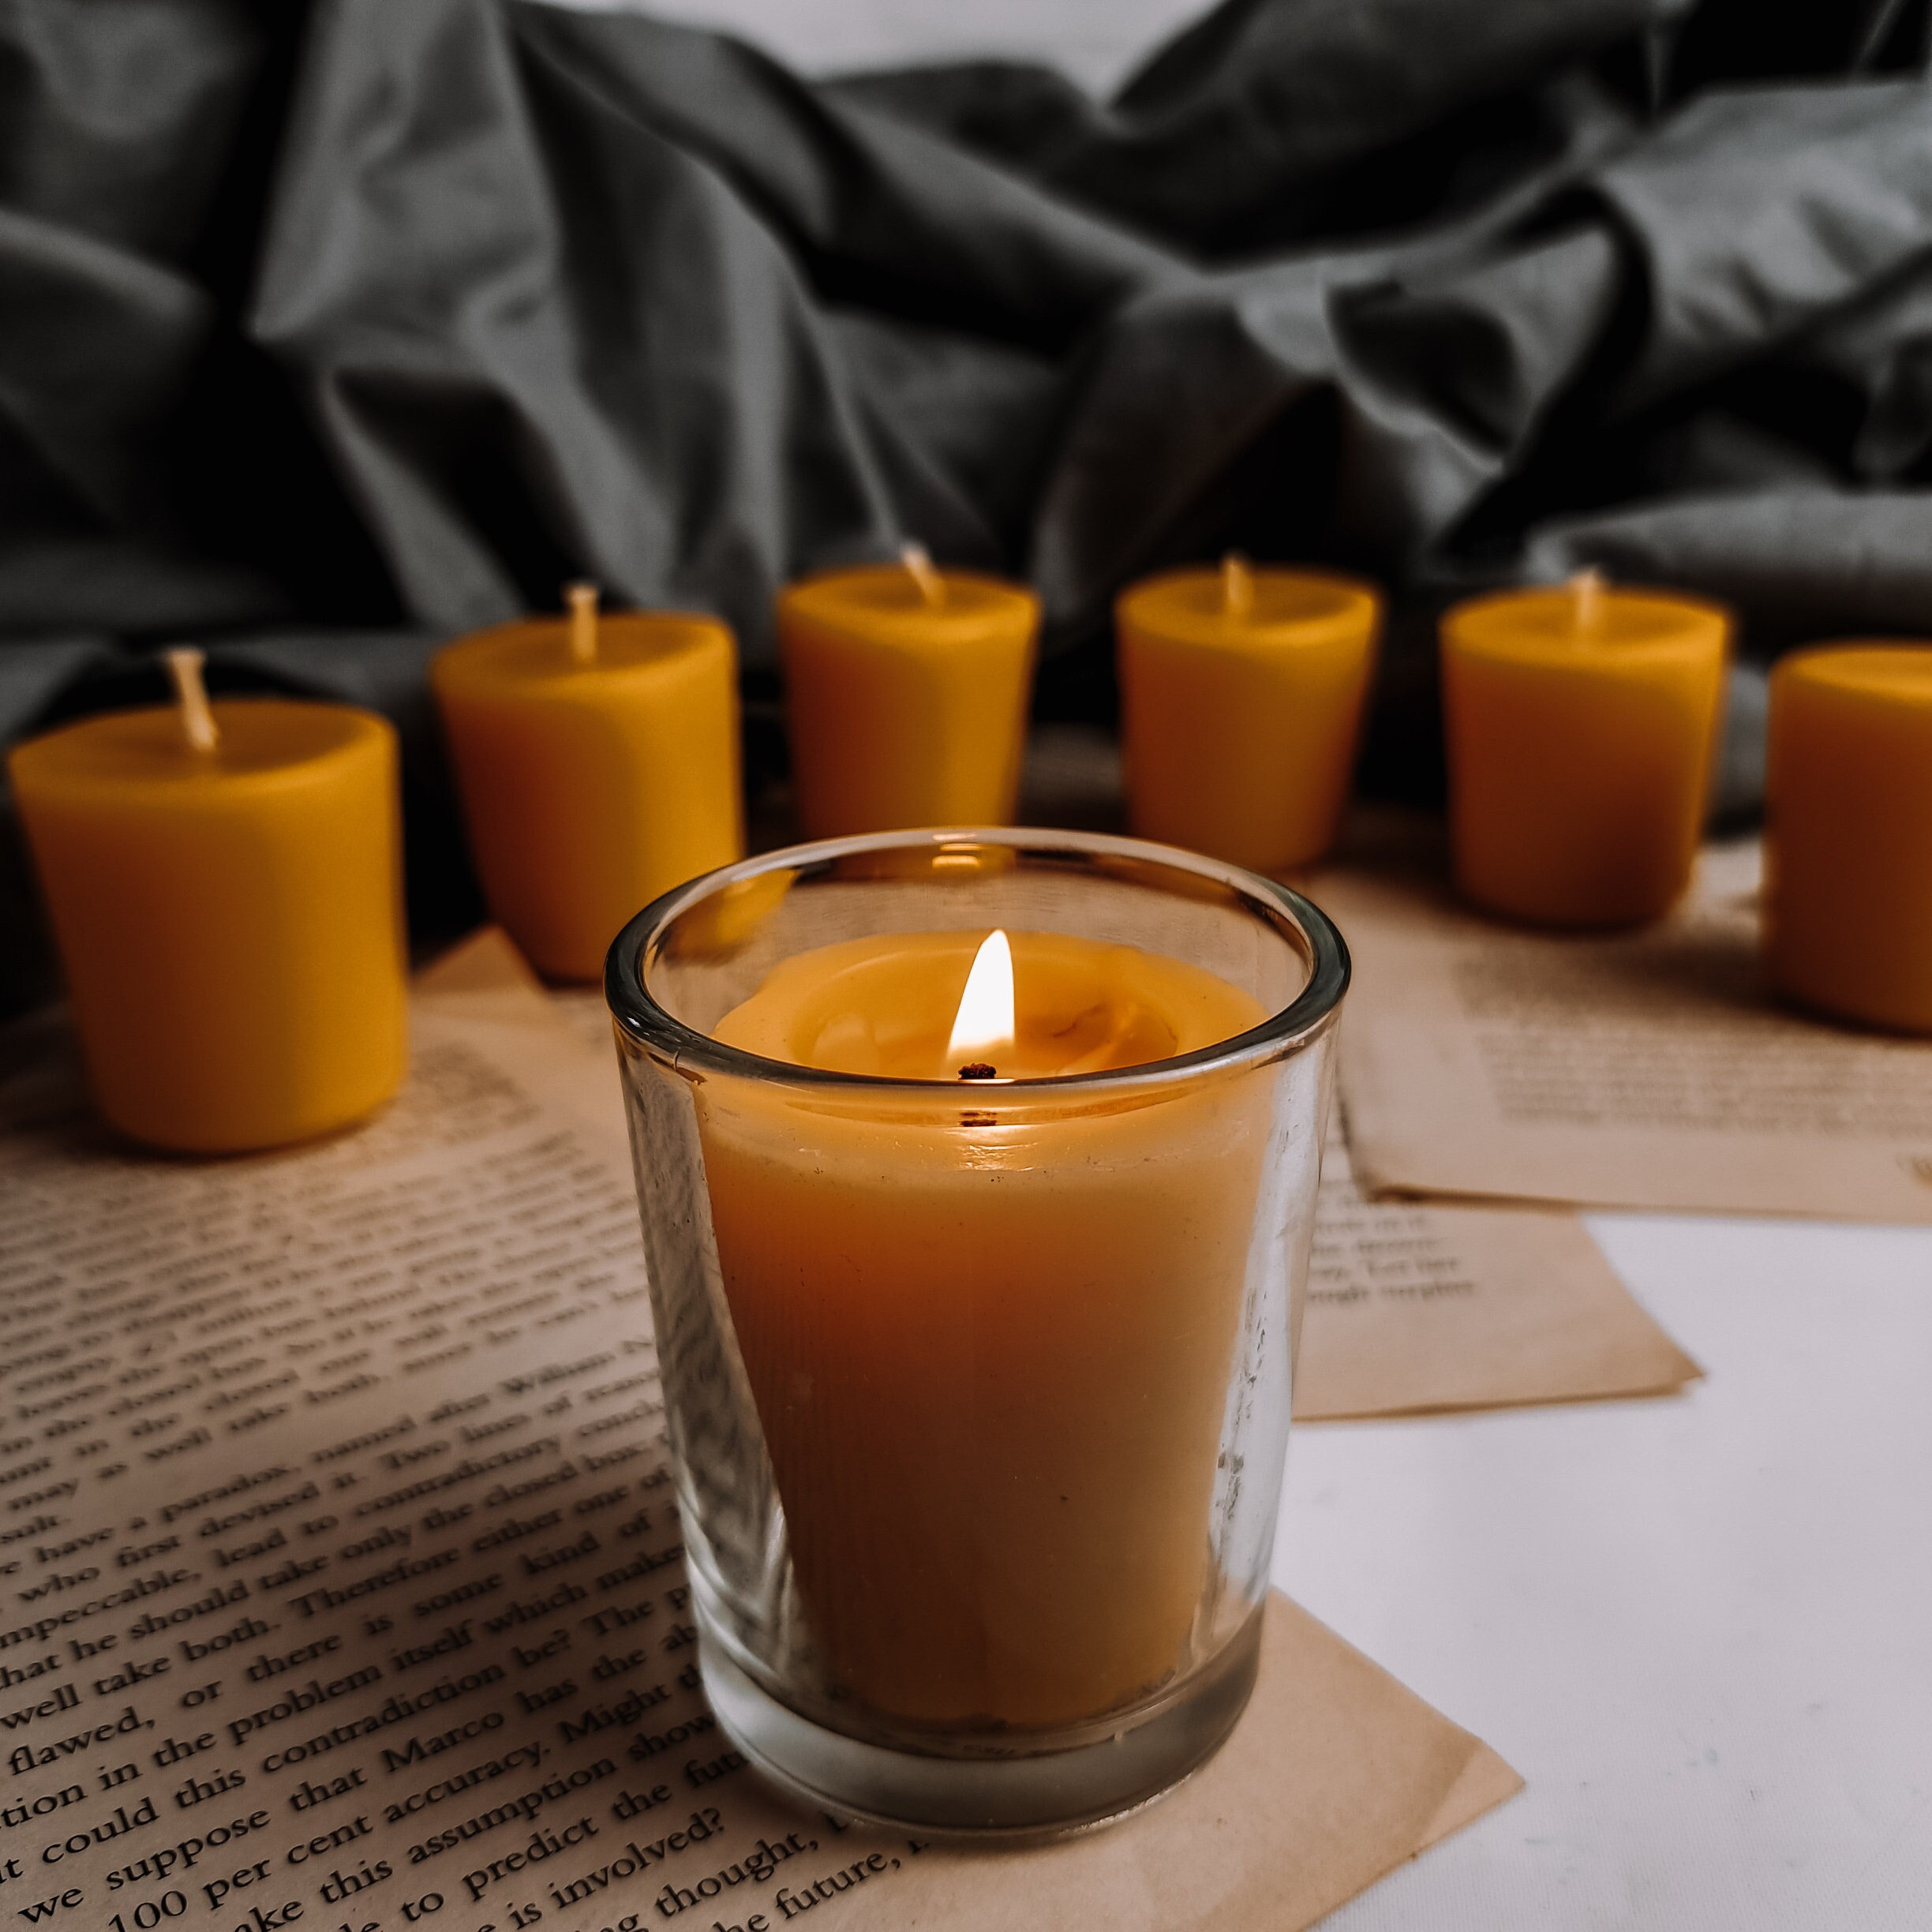 Creating Easy Votive Beeswax Sheet Candles